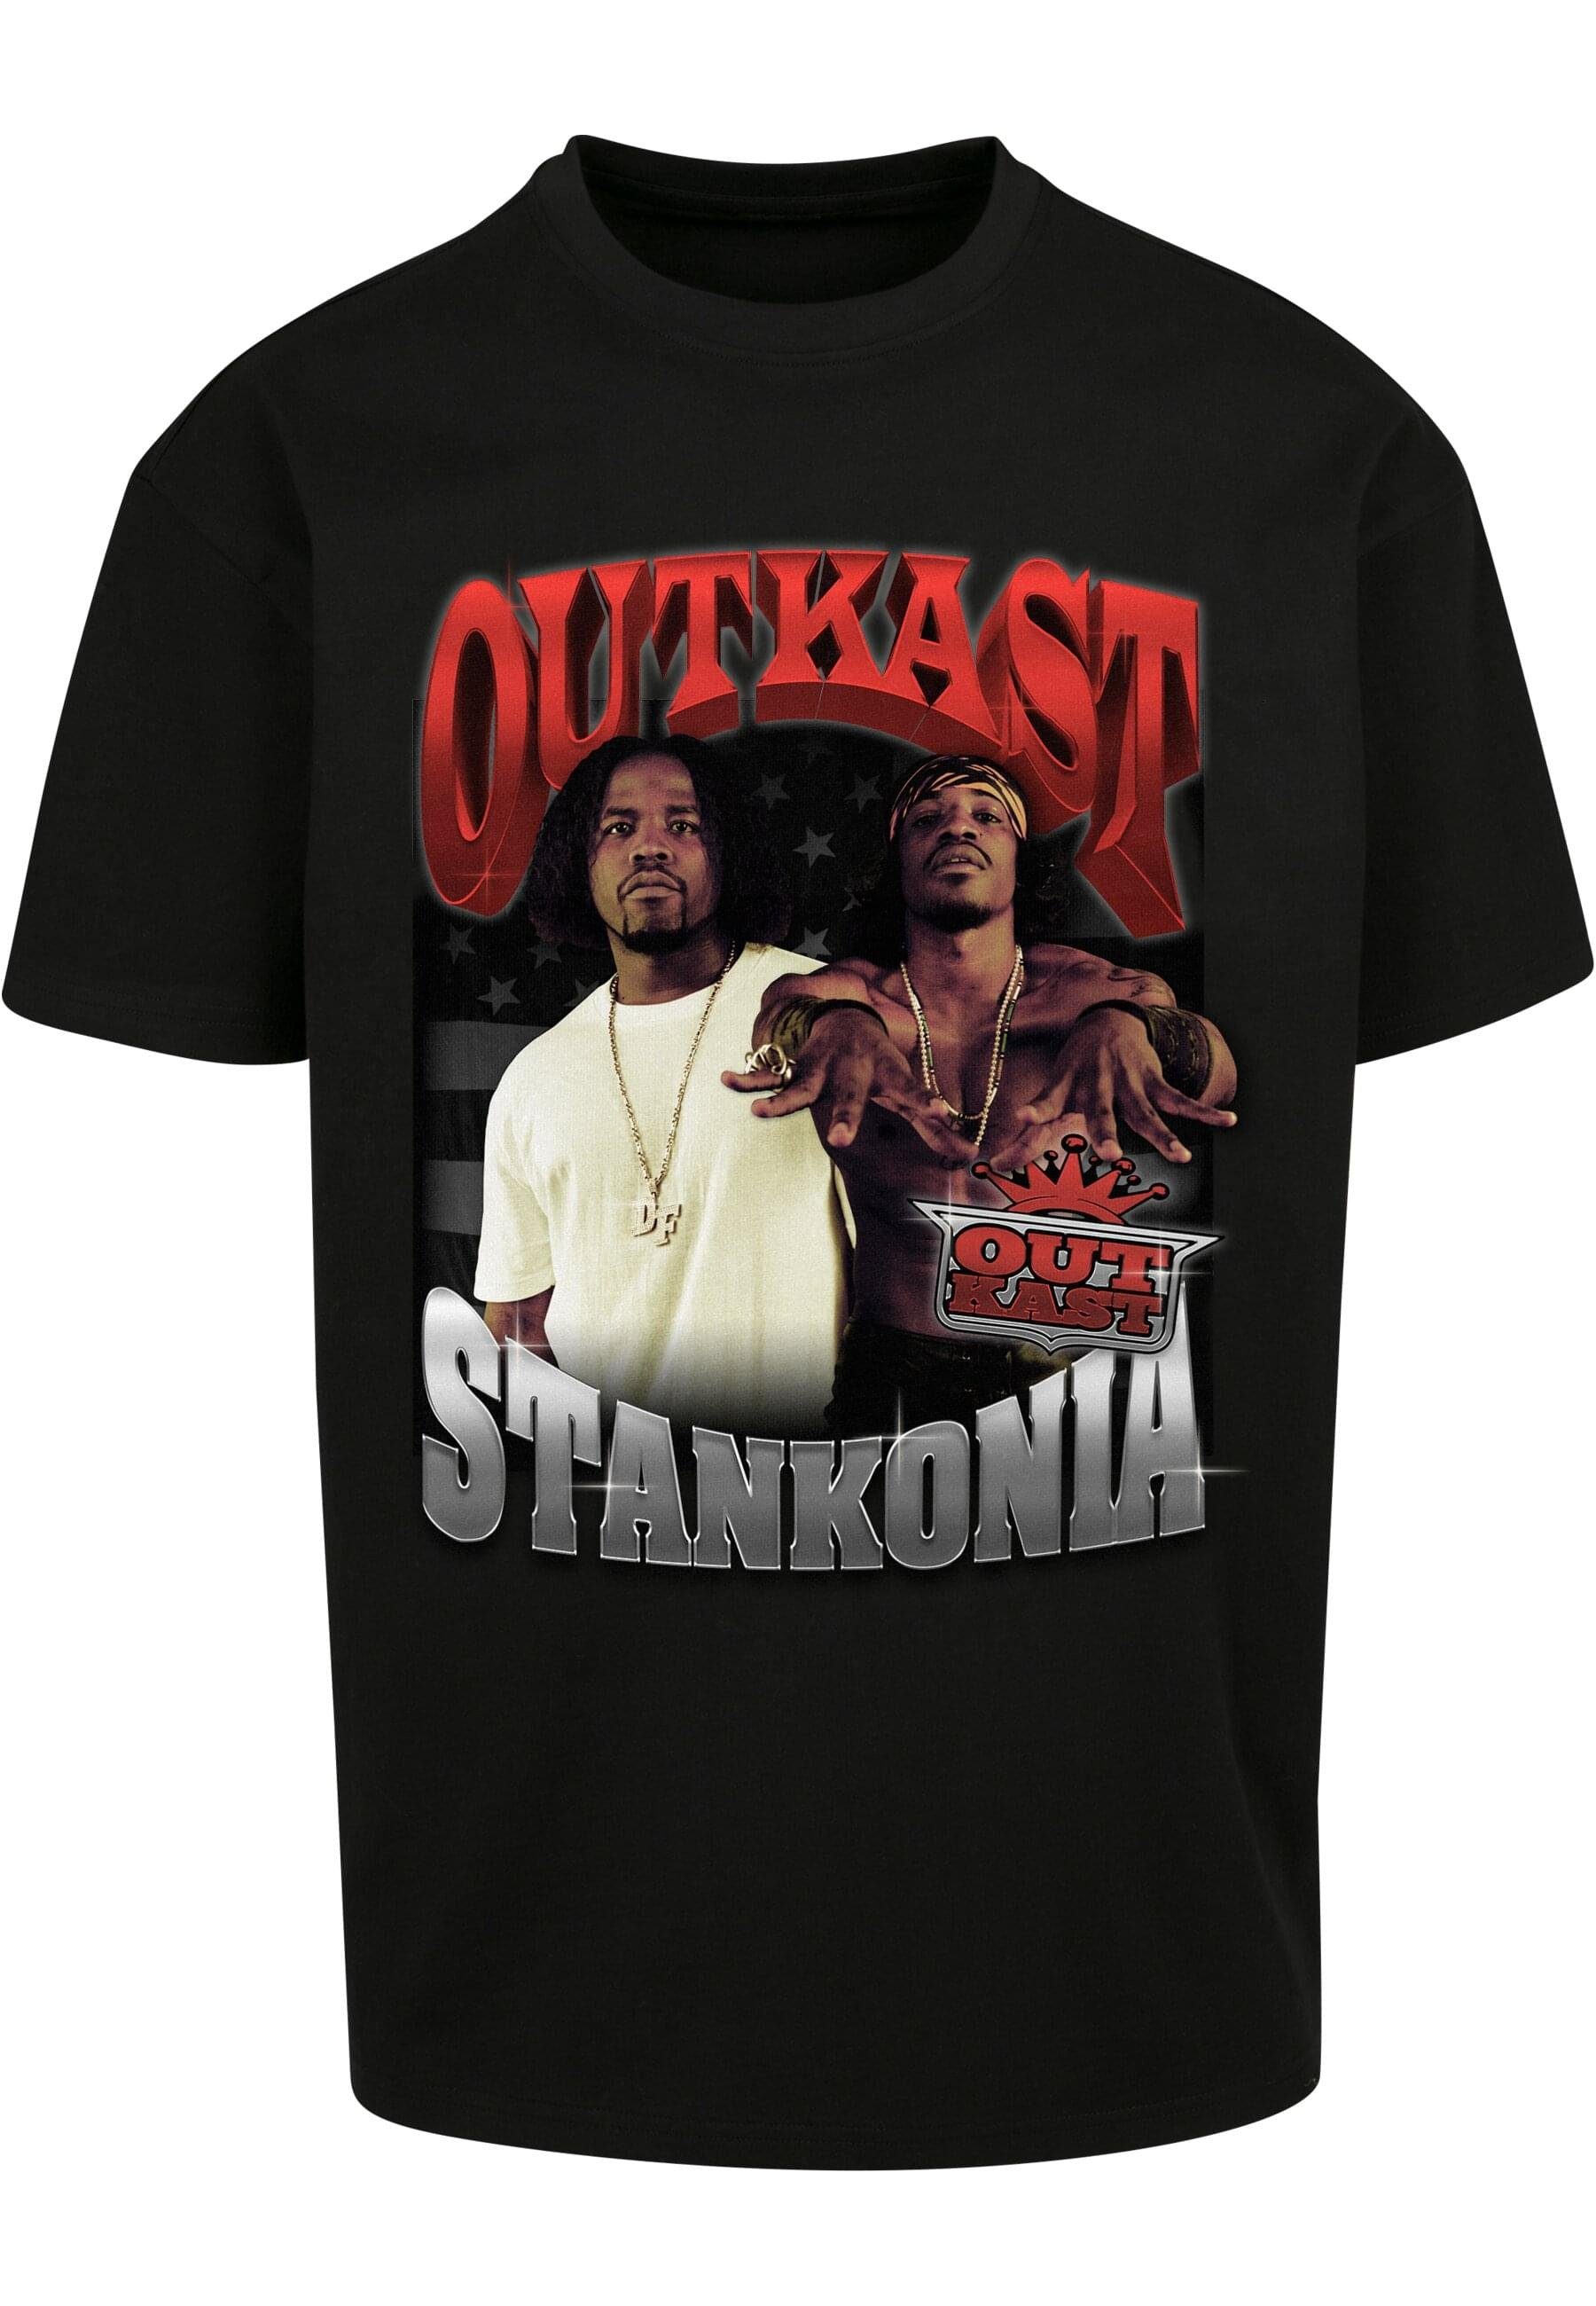 T-Shirt by Tee Herren Upscale Stankonia Oversize Outkast black Mister (1-tlg) Tee